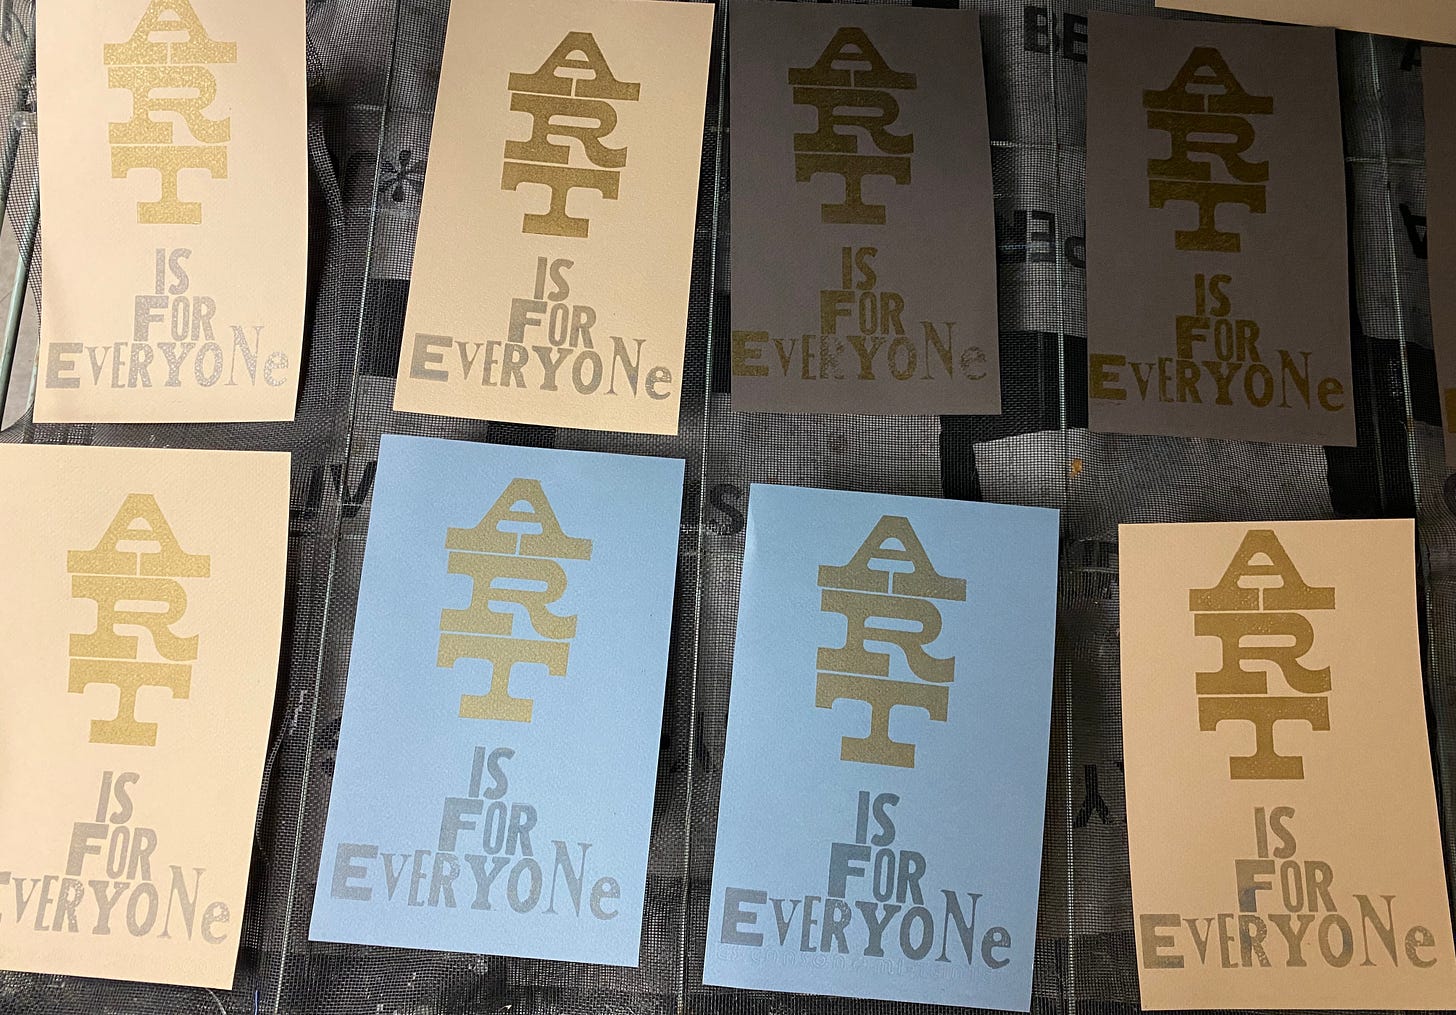 Gold and silver letterpress prints reading "Art is for everyone" on tan, blue, and grey paper, laying on a drying rack.